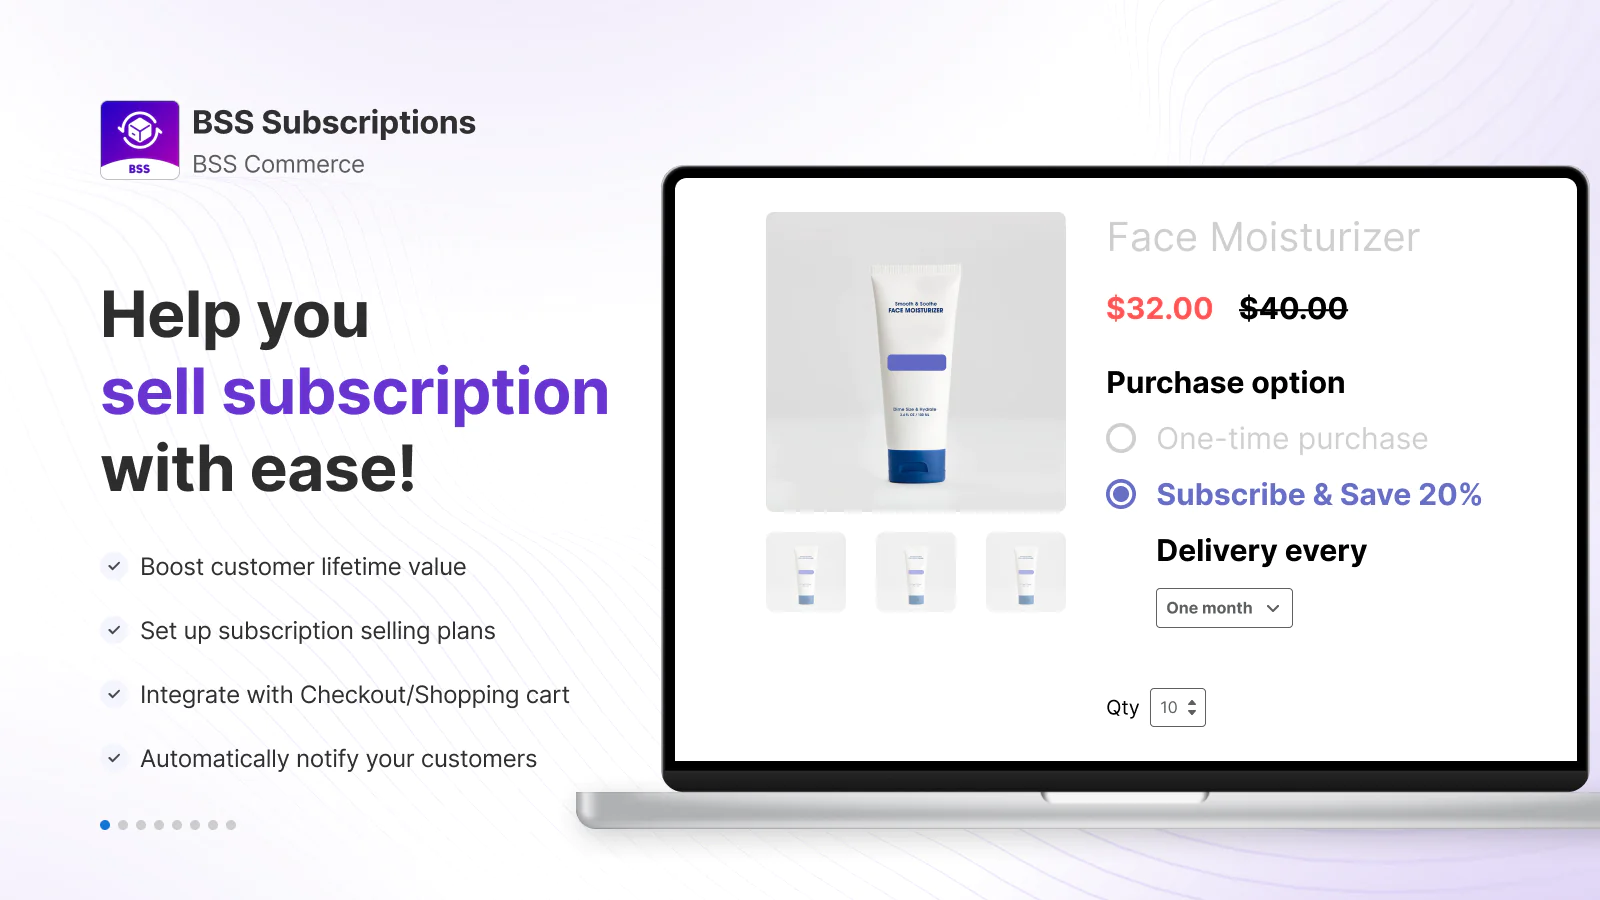 bss-b2b-subscriptions-sell-subscription